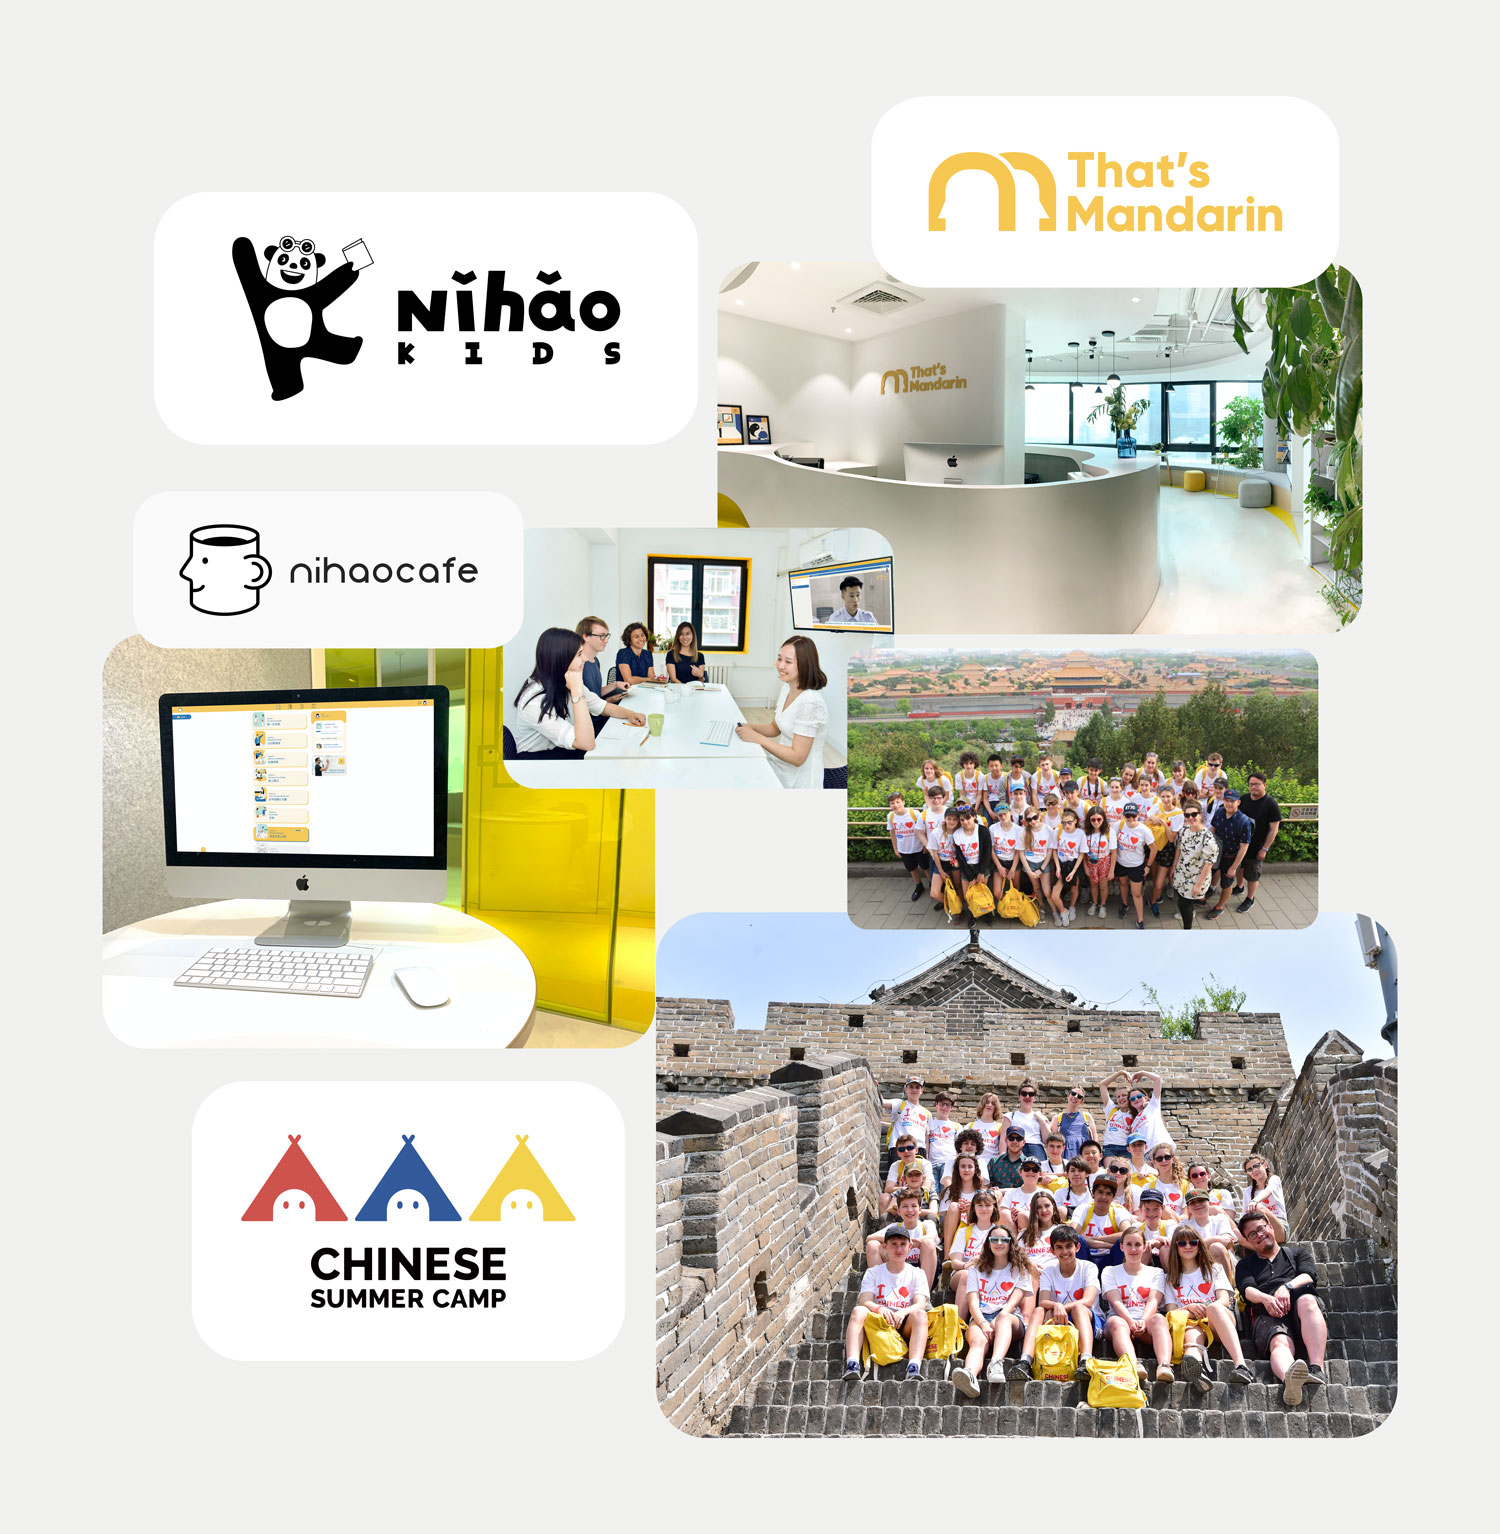 About NihaoKids group